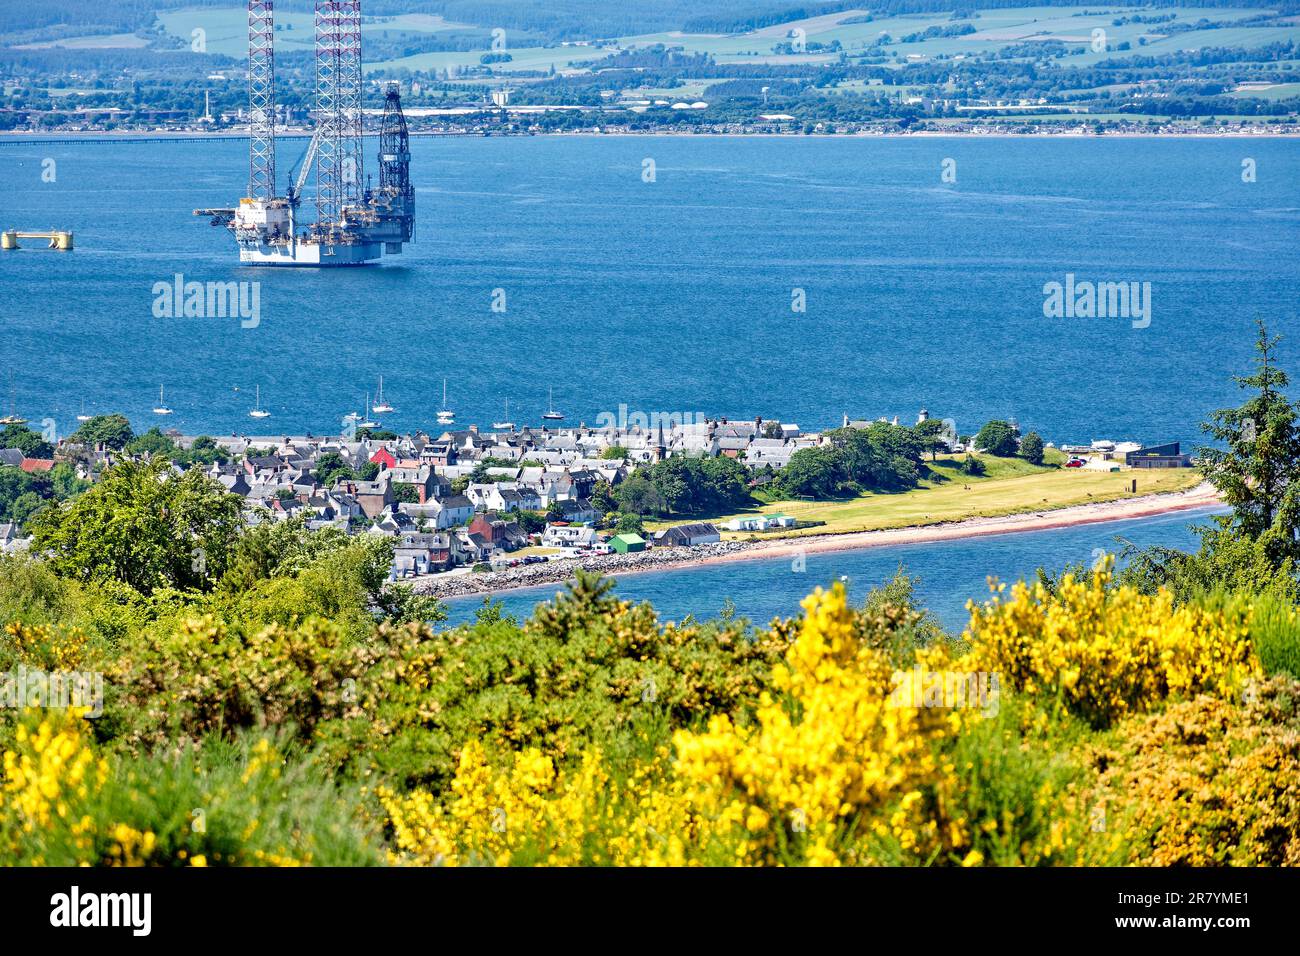 Cromarty Scotland Cromarty Firth a blue sky yellow Broom flowers and a view over the town the houses and oil rig towards the hills in early summer Stock Photo